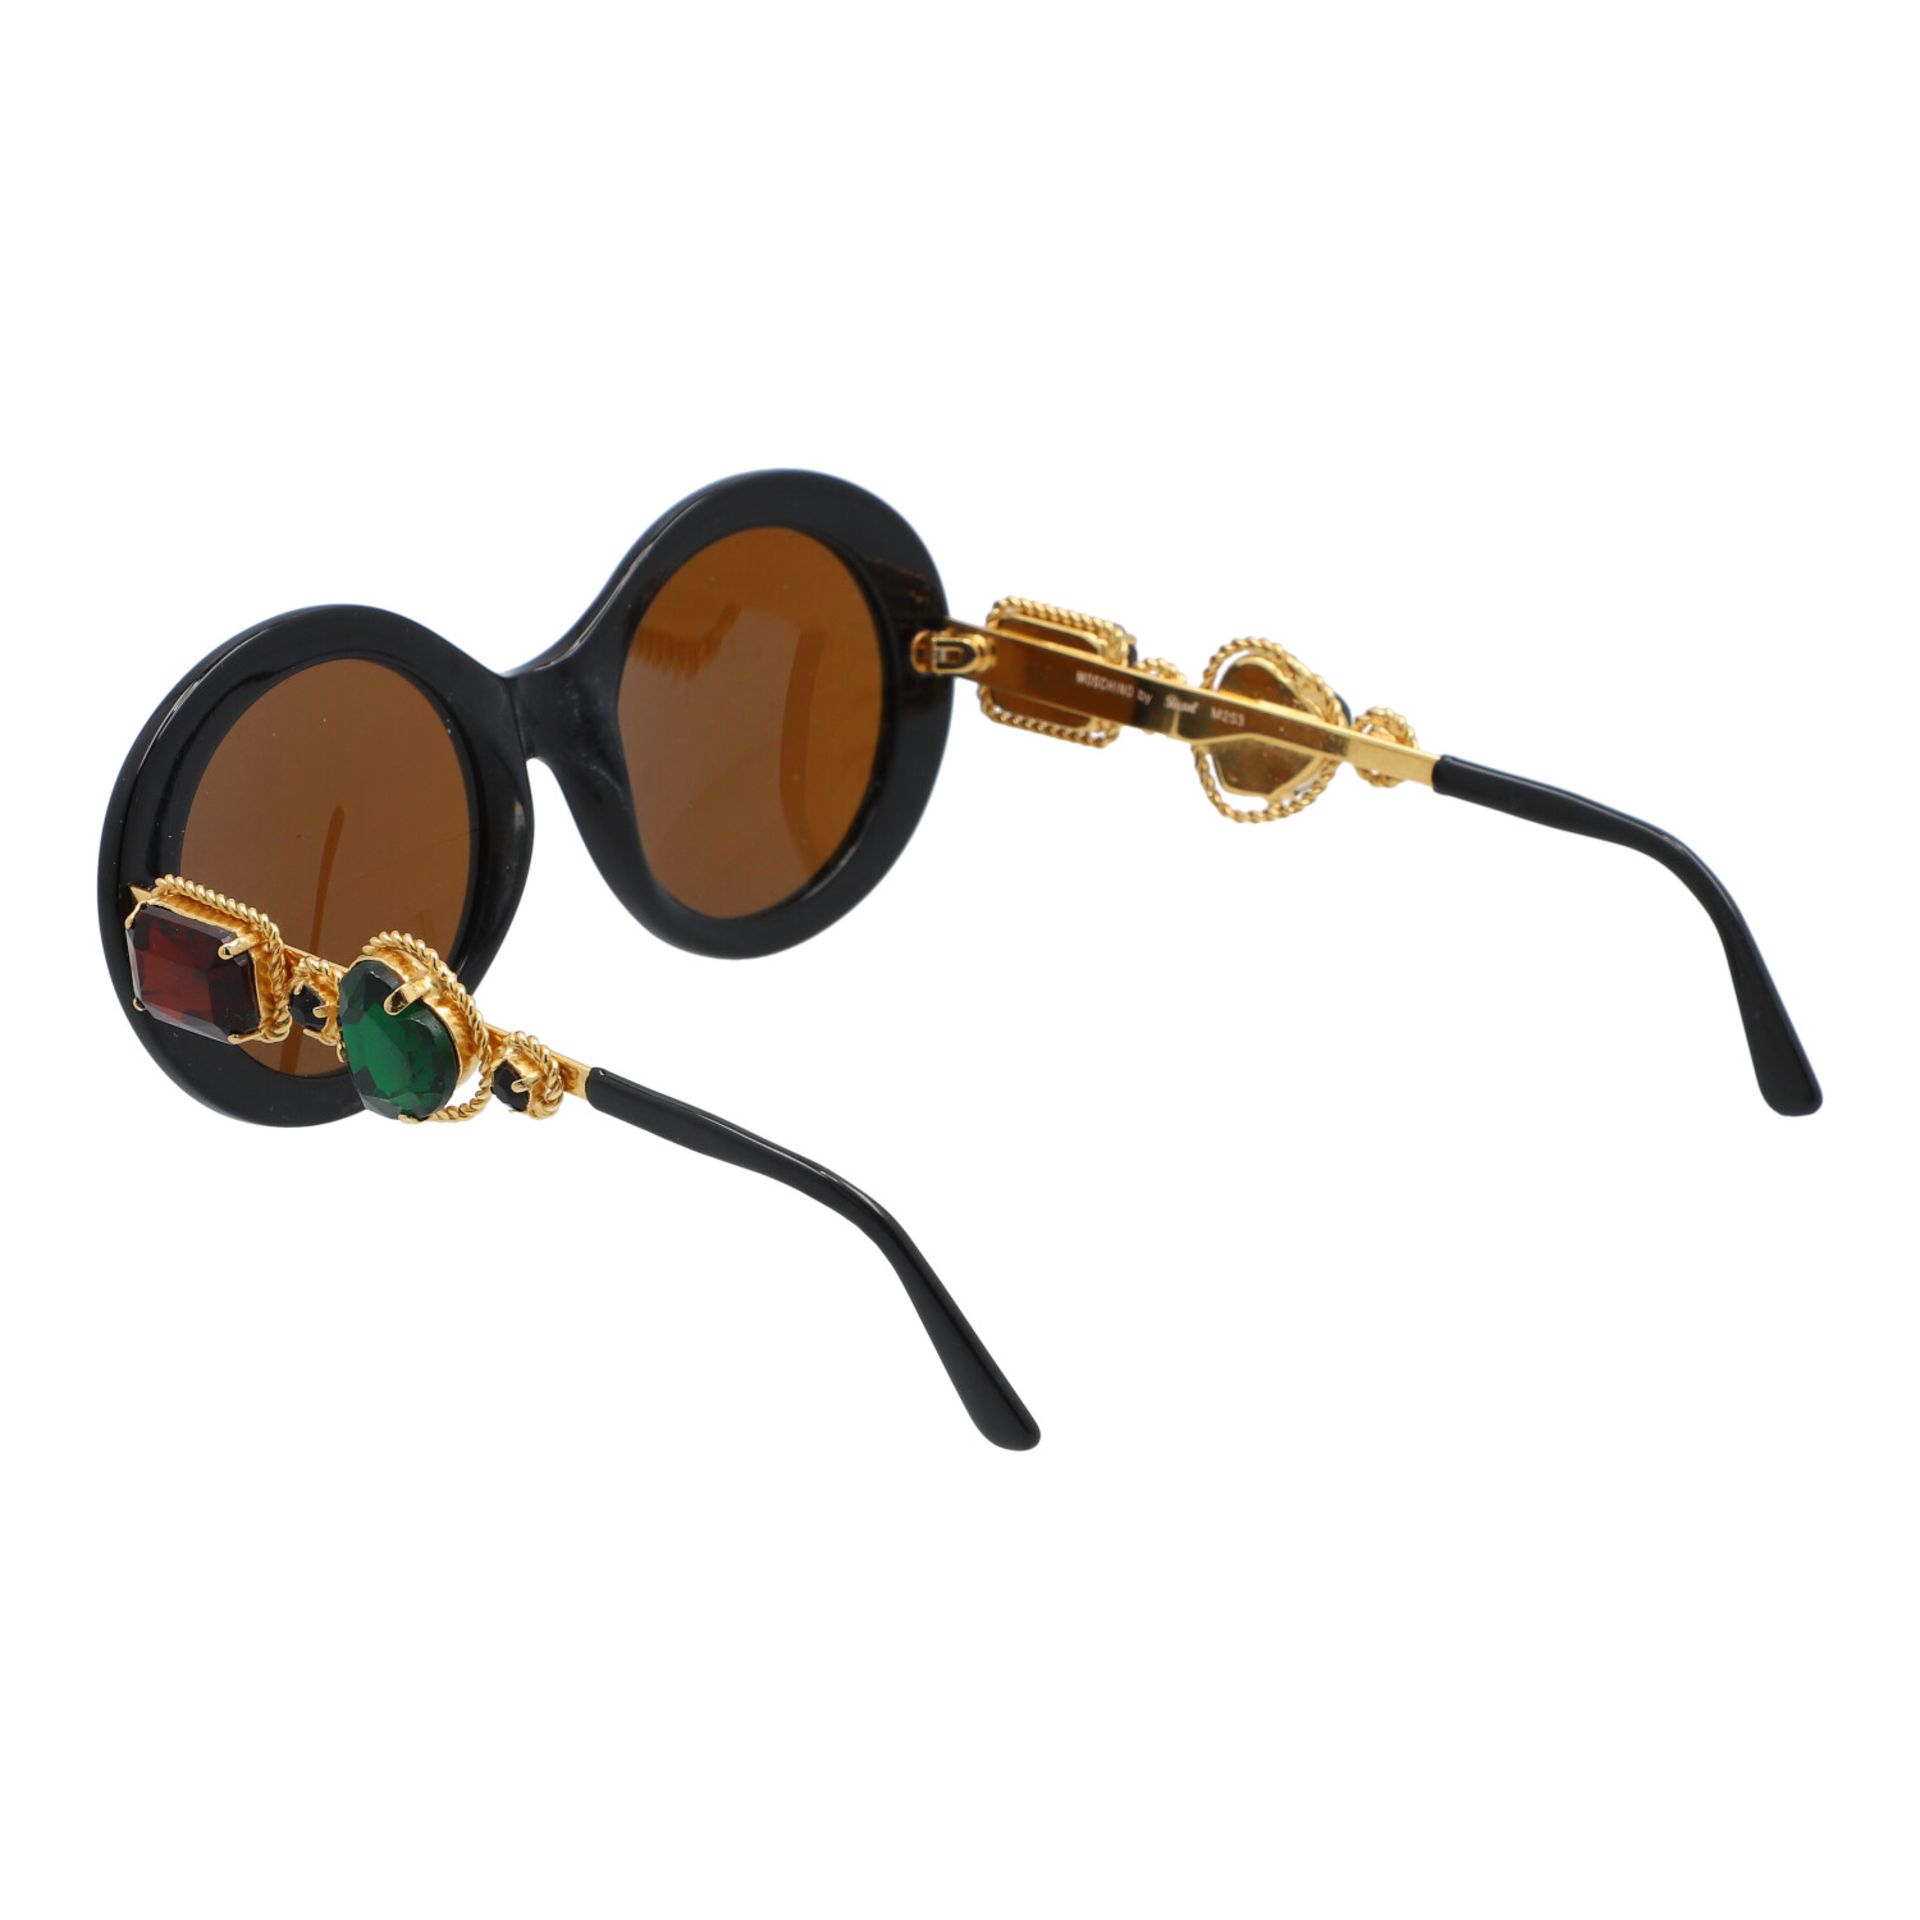 MOSCHINO BY PERSOL VINTAGE Sonnenbrille "M253 - LADY GAGA", Koll.: 1989. - Image 5 of 6